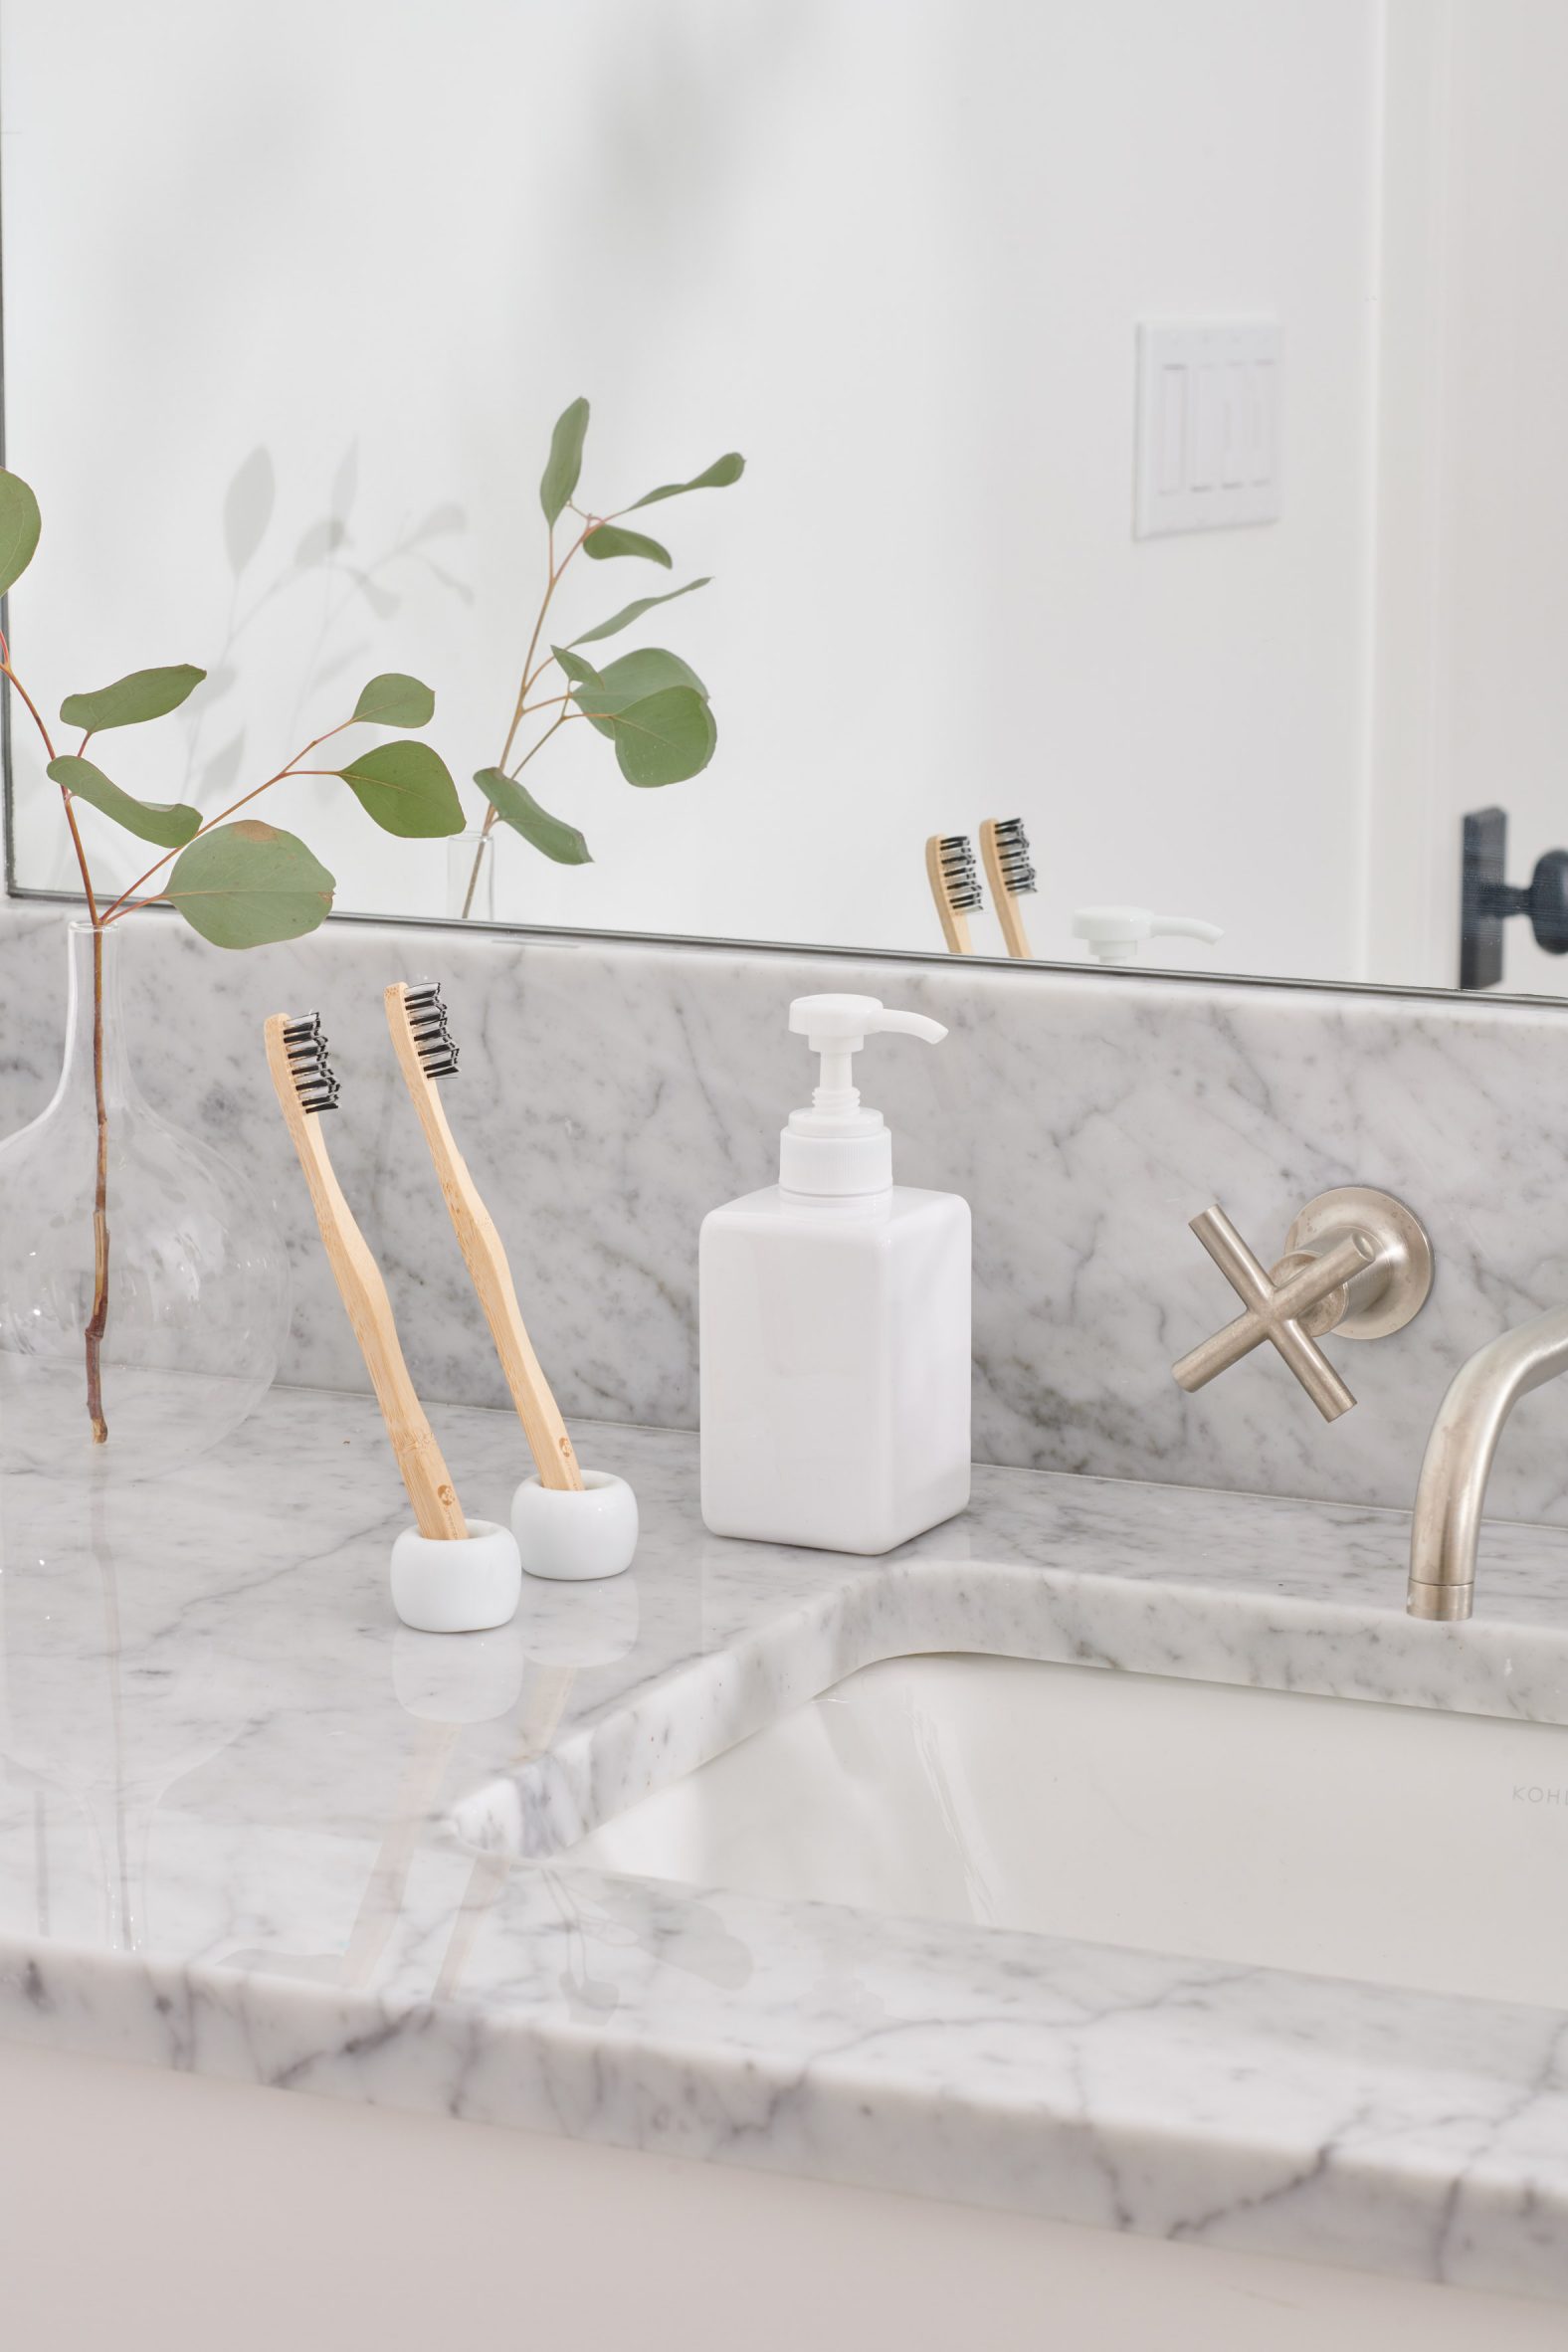 Soap dispensers feature in the Airbnb Host Essentials kit by Muji